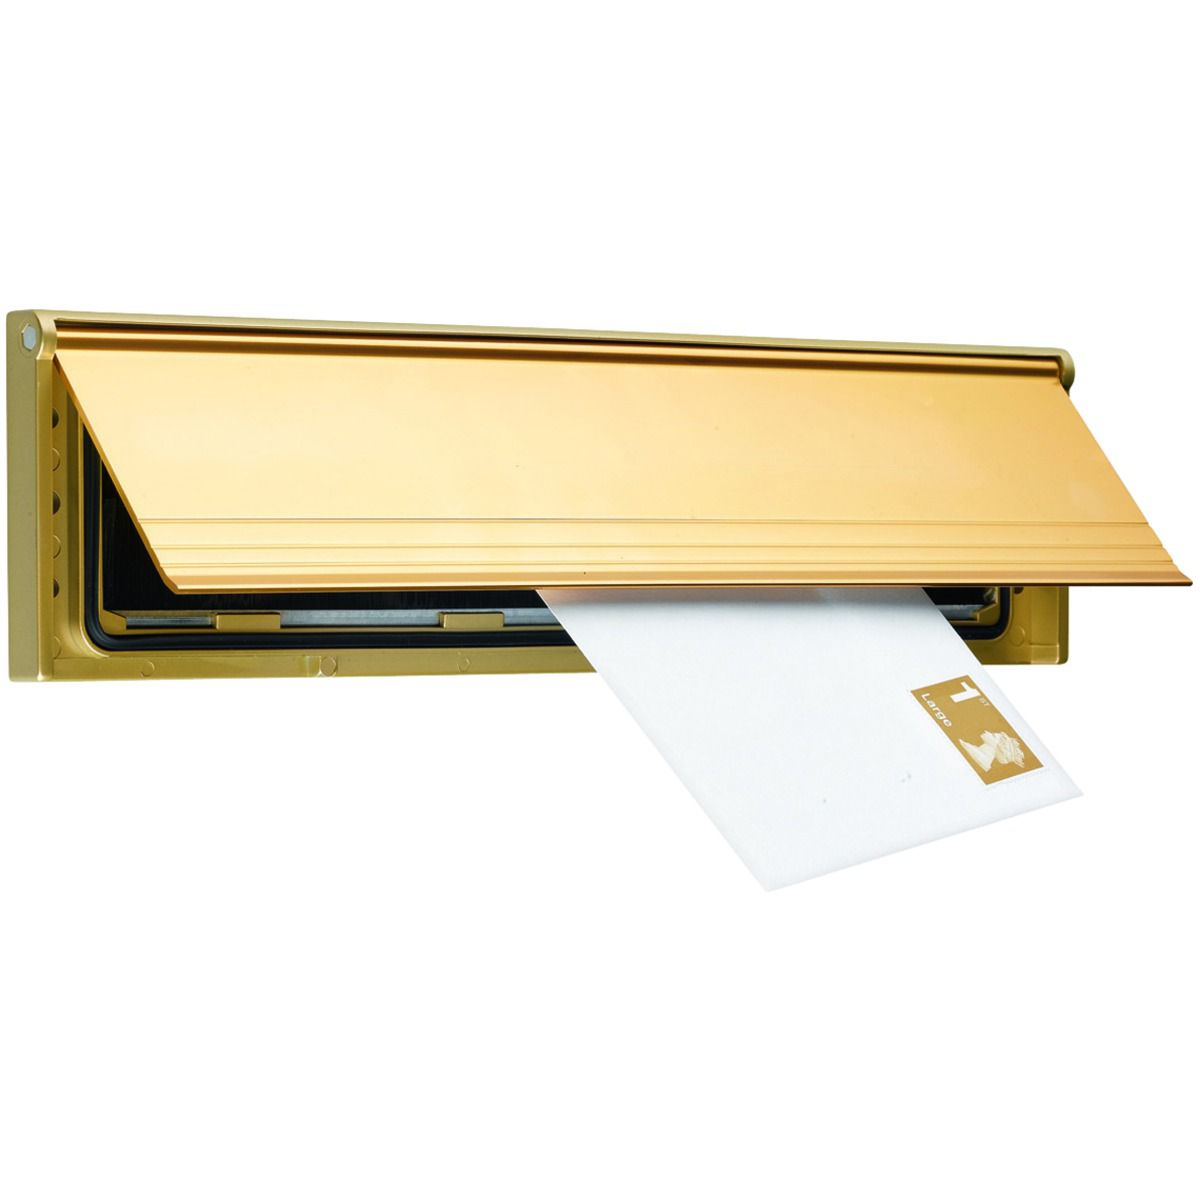 Image of Wickes 75 x 292mm Internal Letter Box Draught Excluder with Flap - Gold Effect